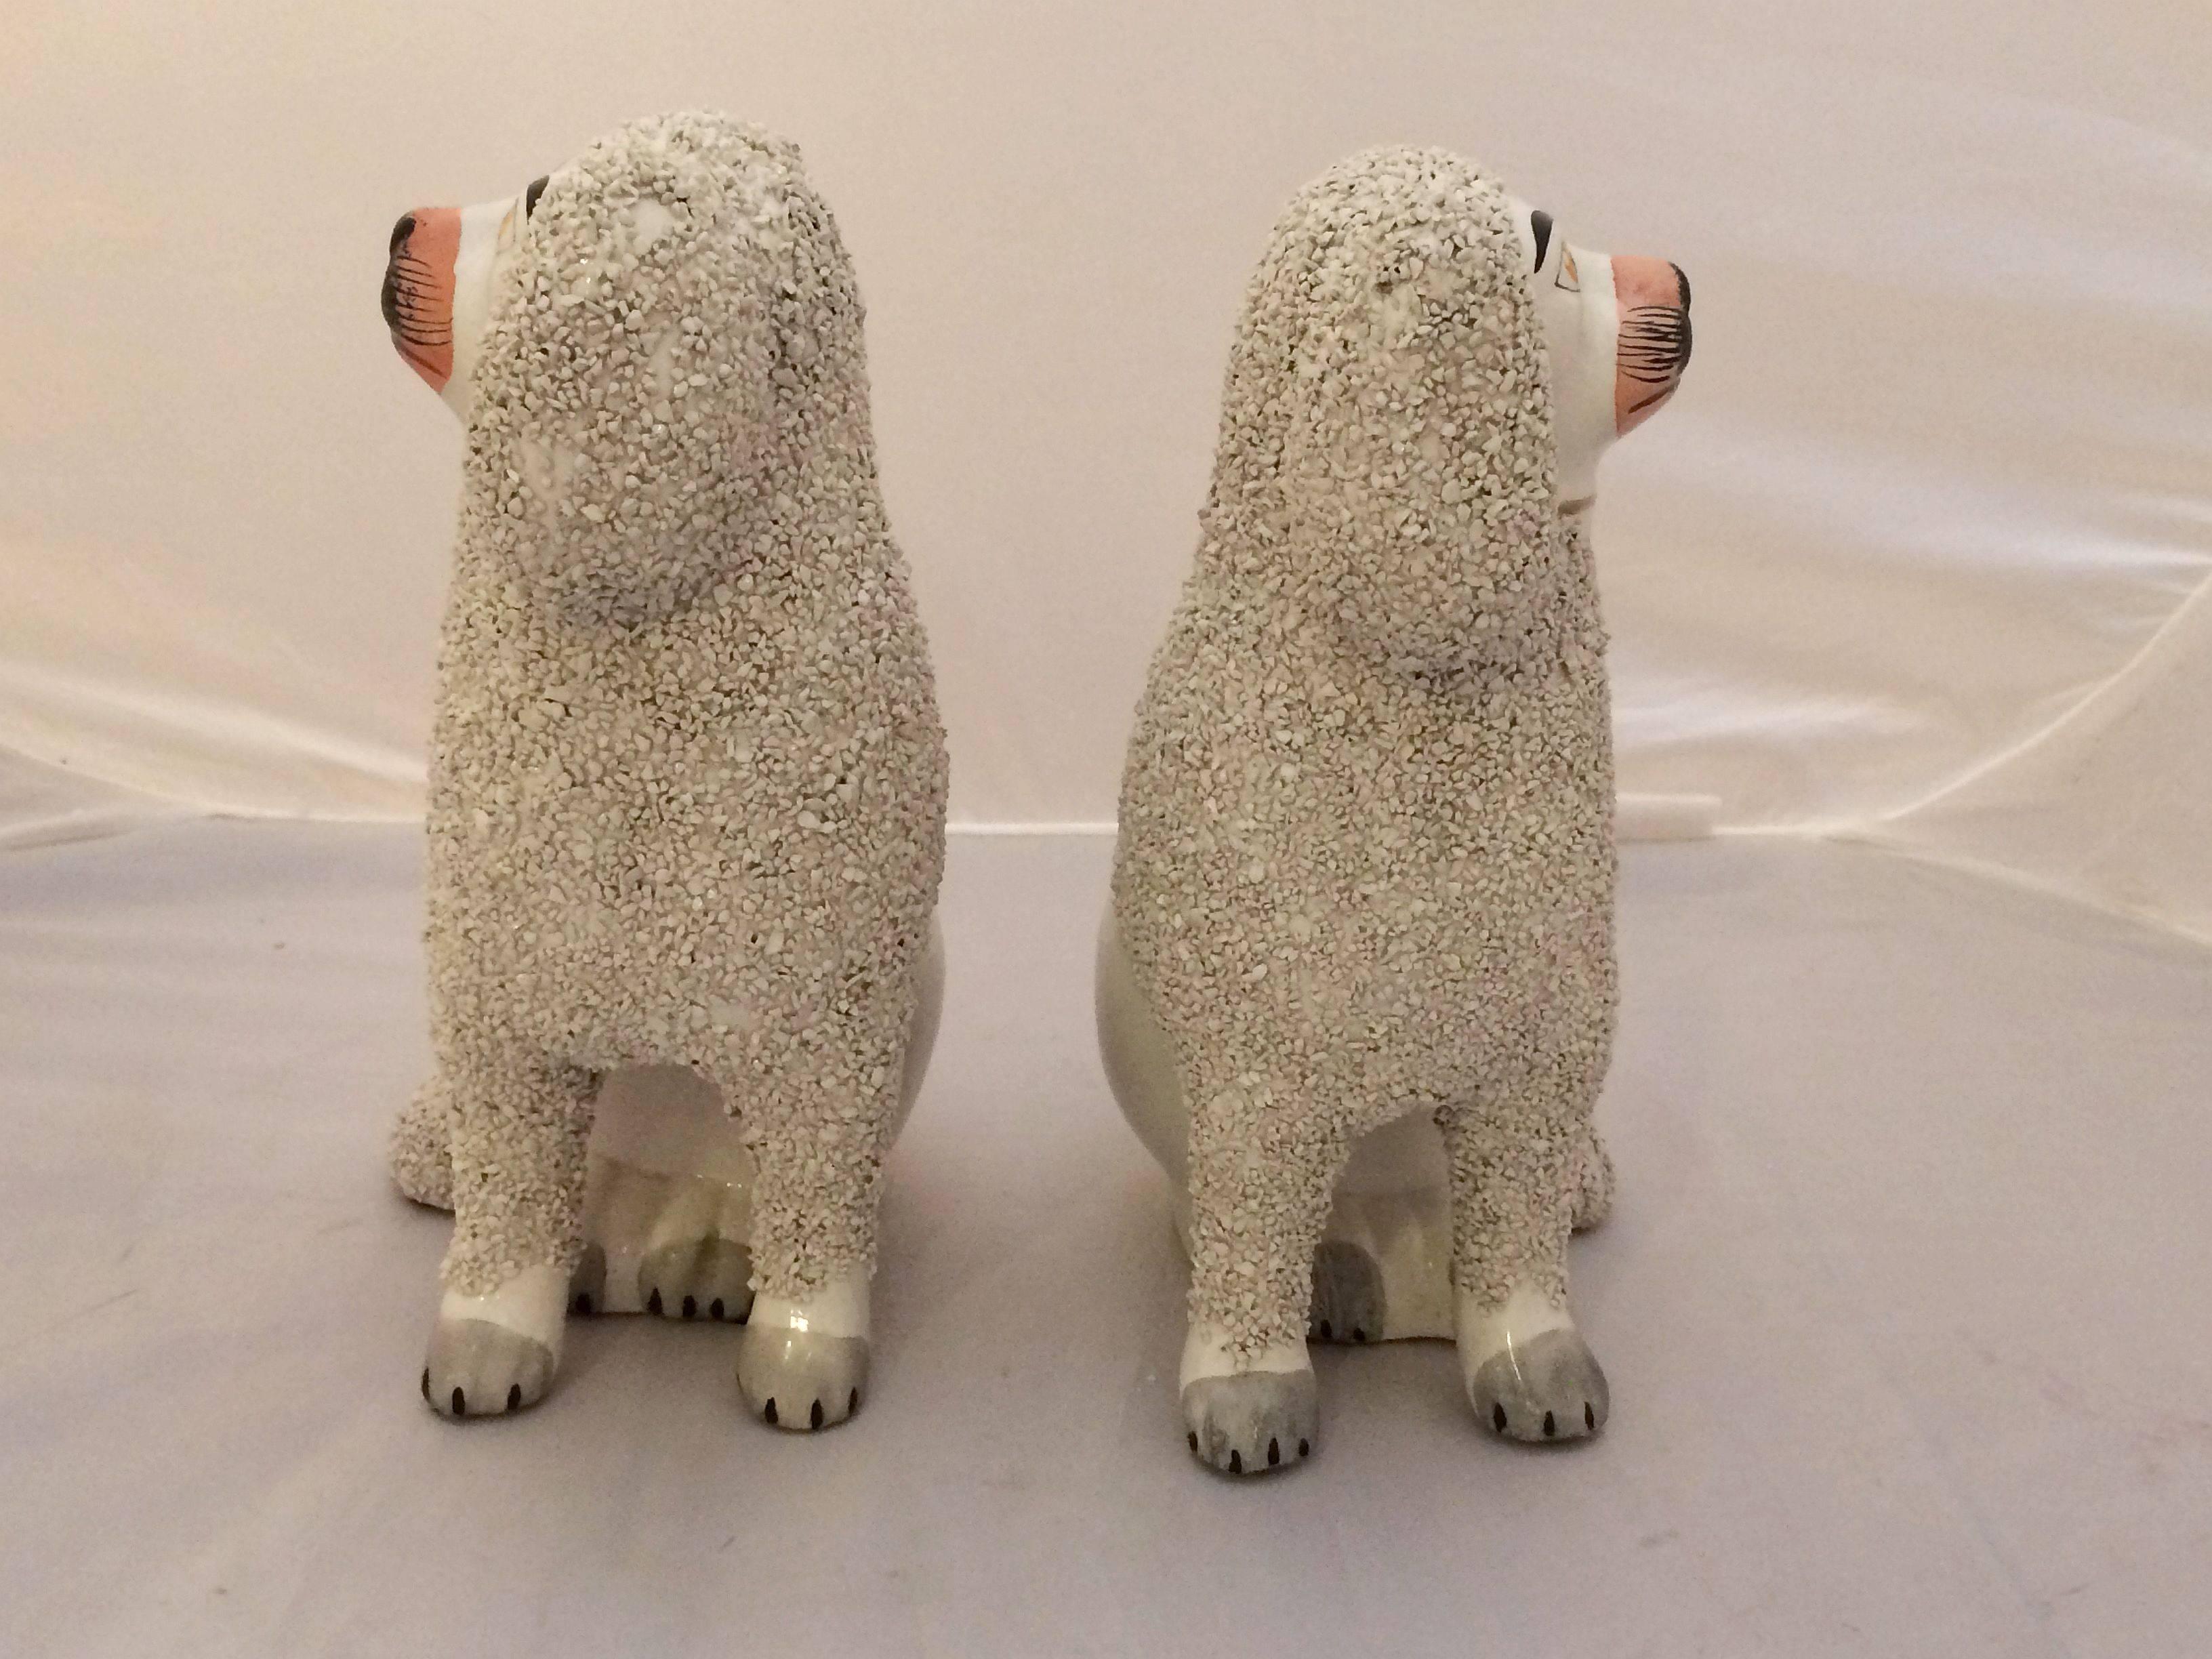 English Pair of Large 19th Century Staffordshire Poodles from England